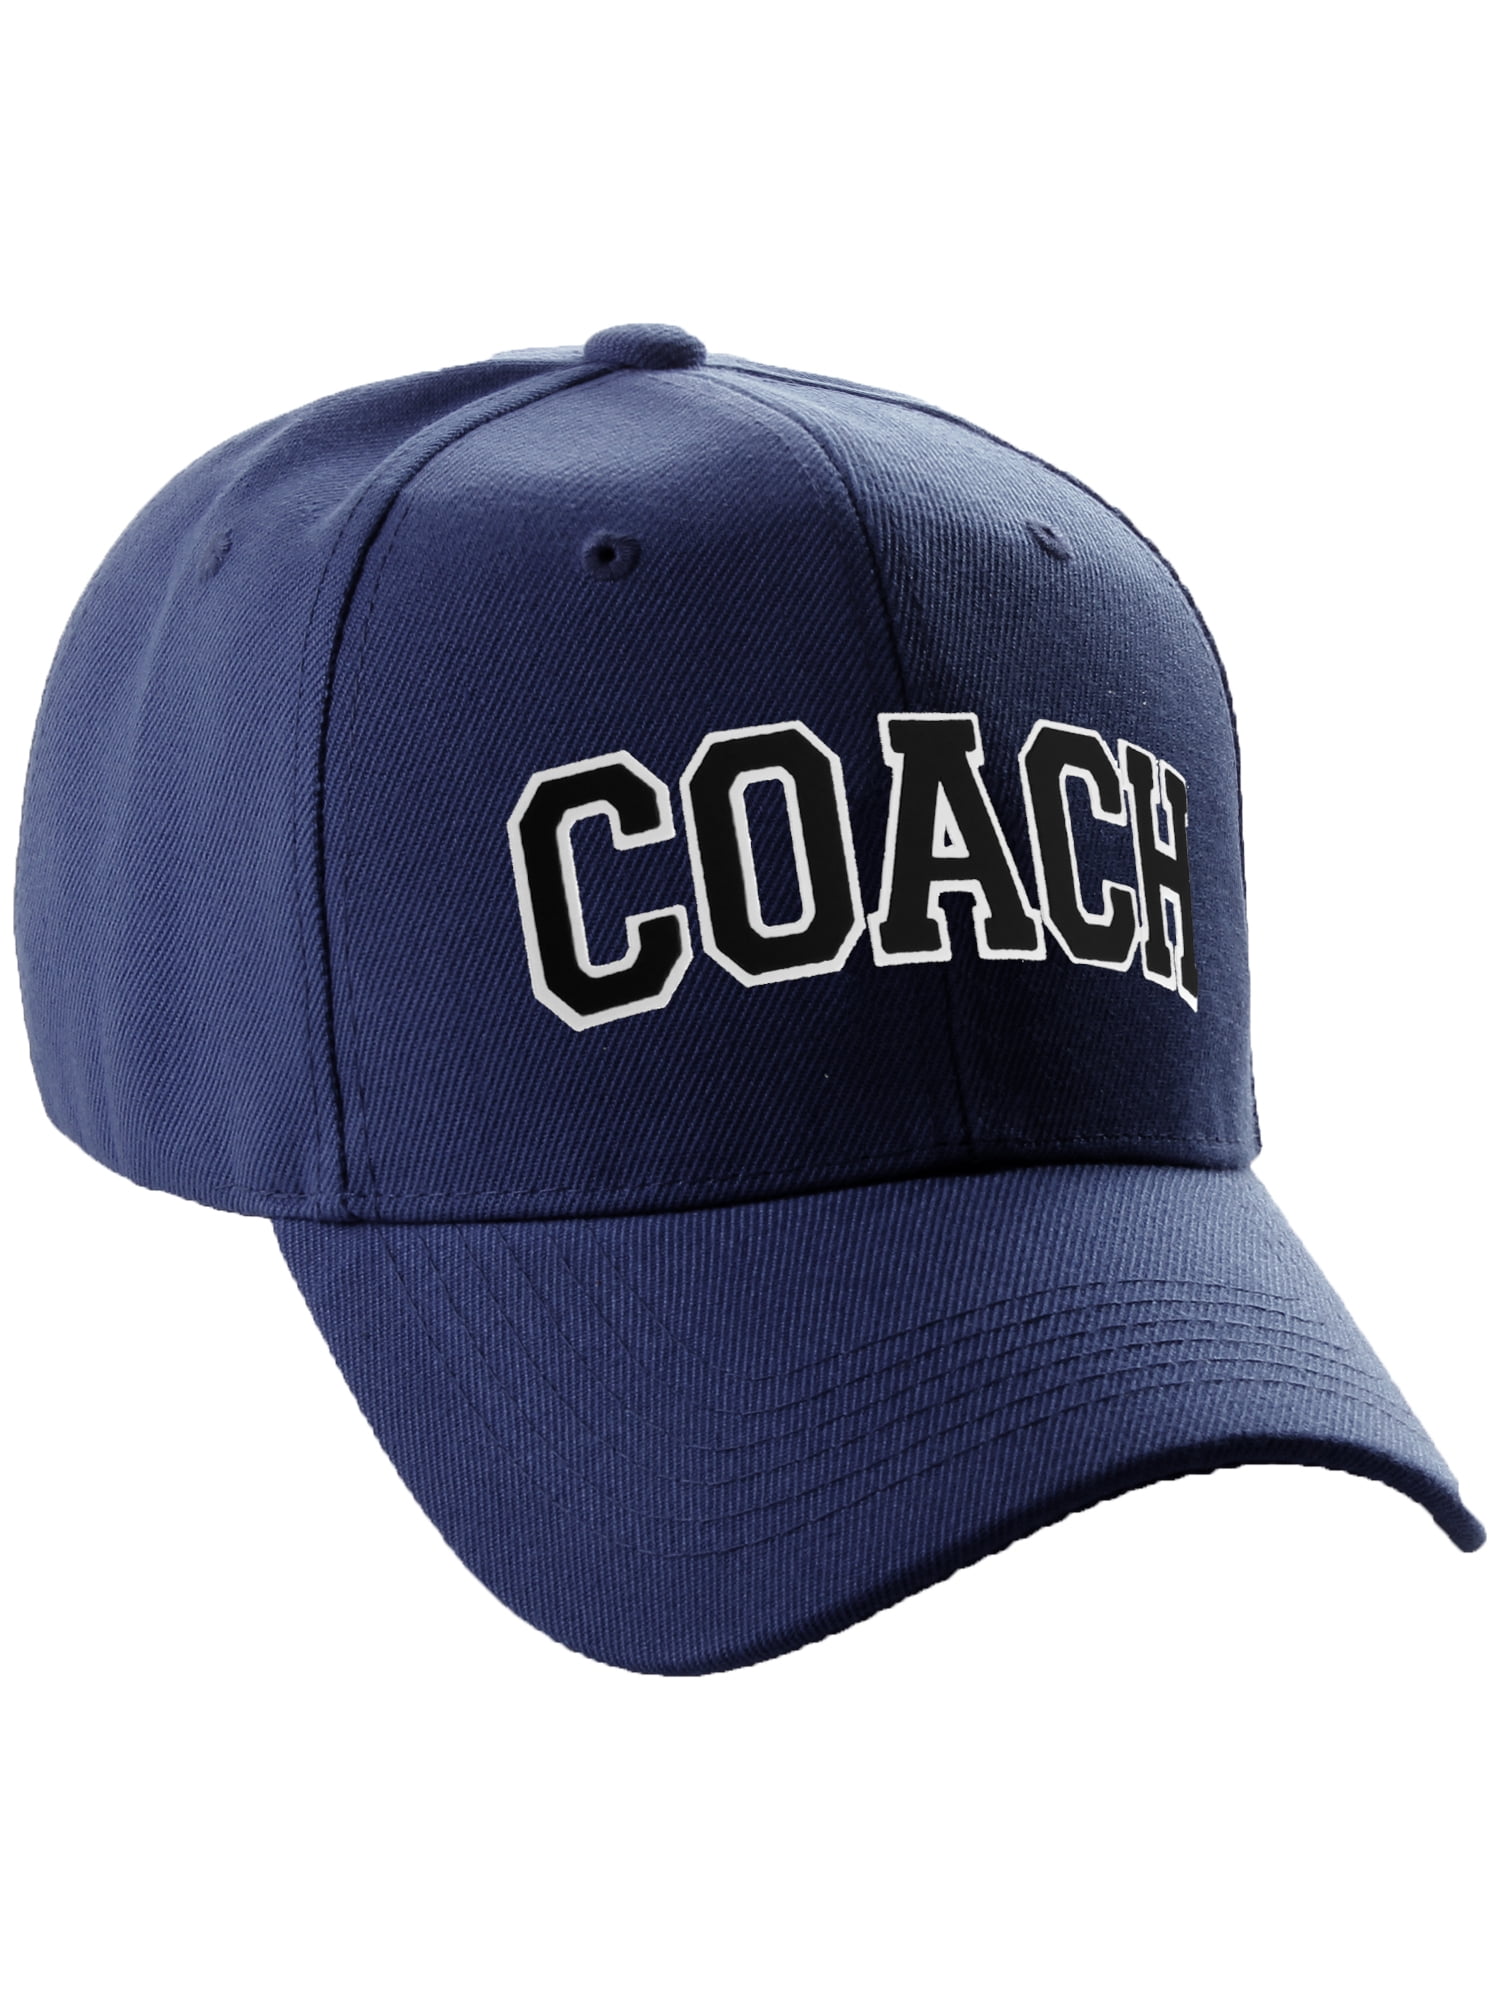 Structured Baseball Hat Classic Team Coach Arched Letters Adjustable Curved  Cap, Navy Hat White Black Letters